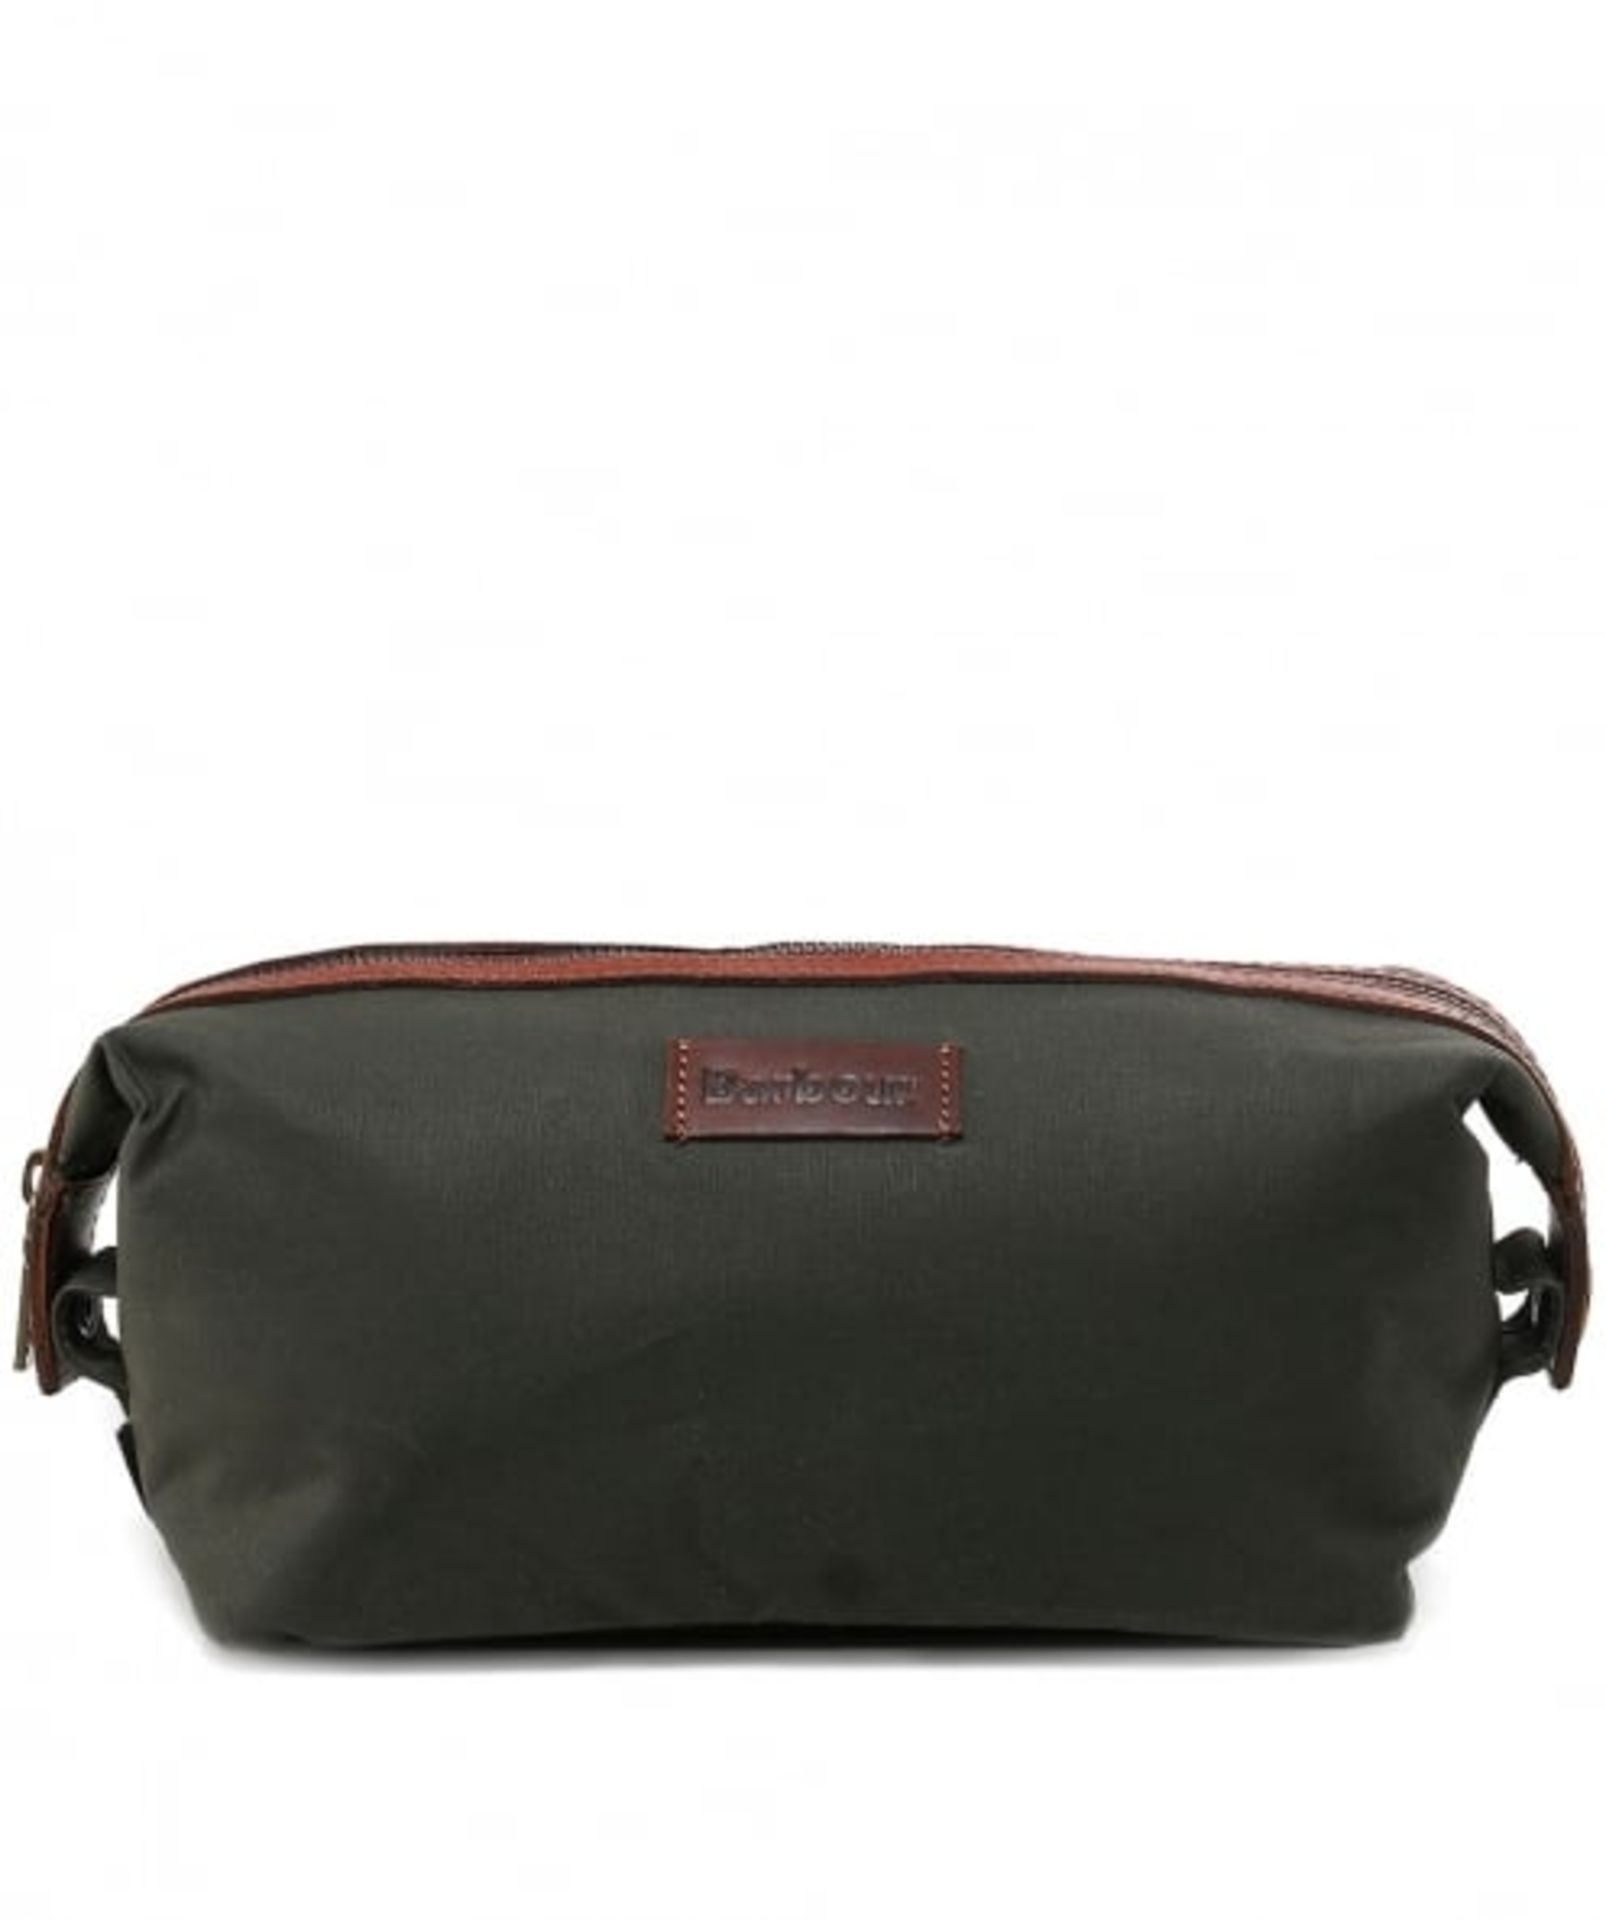 BRAND NEW BARBOUR DRY WAX CONVERTIBLE WASH BAG (5784) RRP £76-10 (353/27) - Image 3 of 3